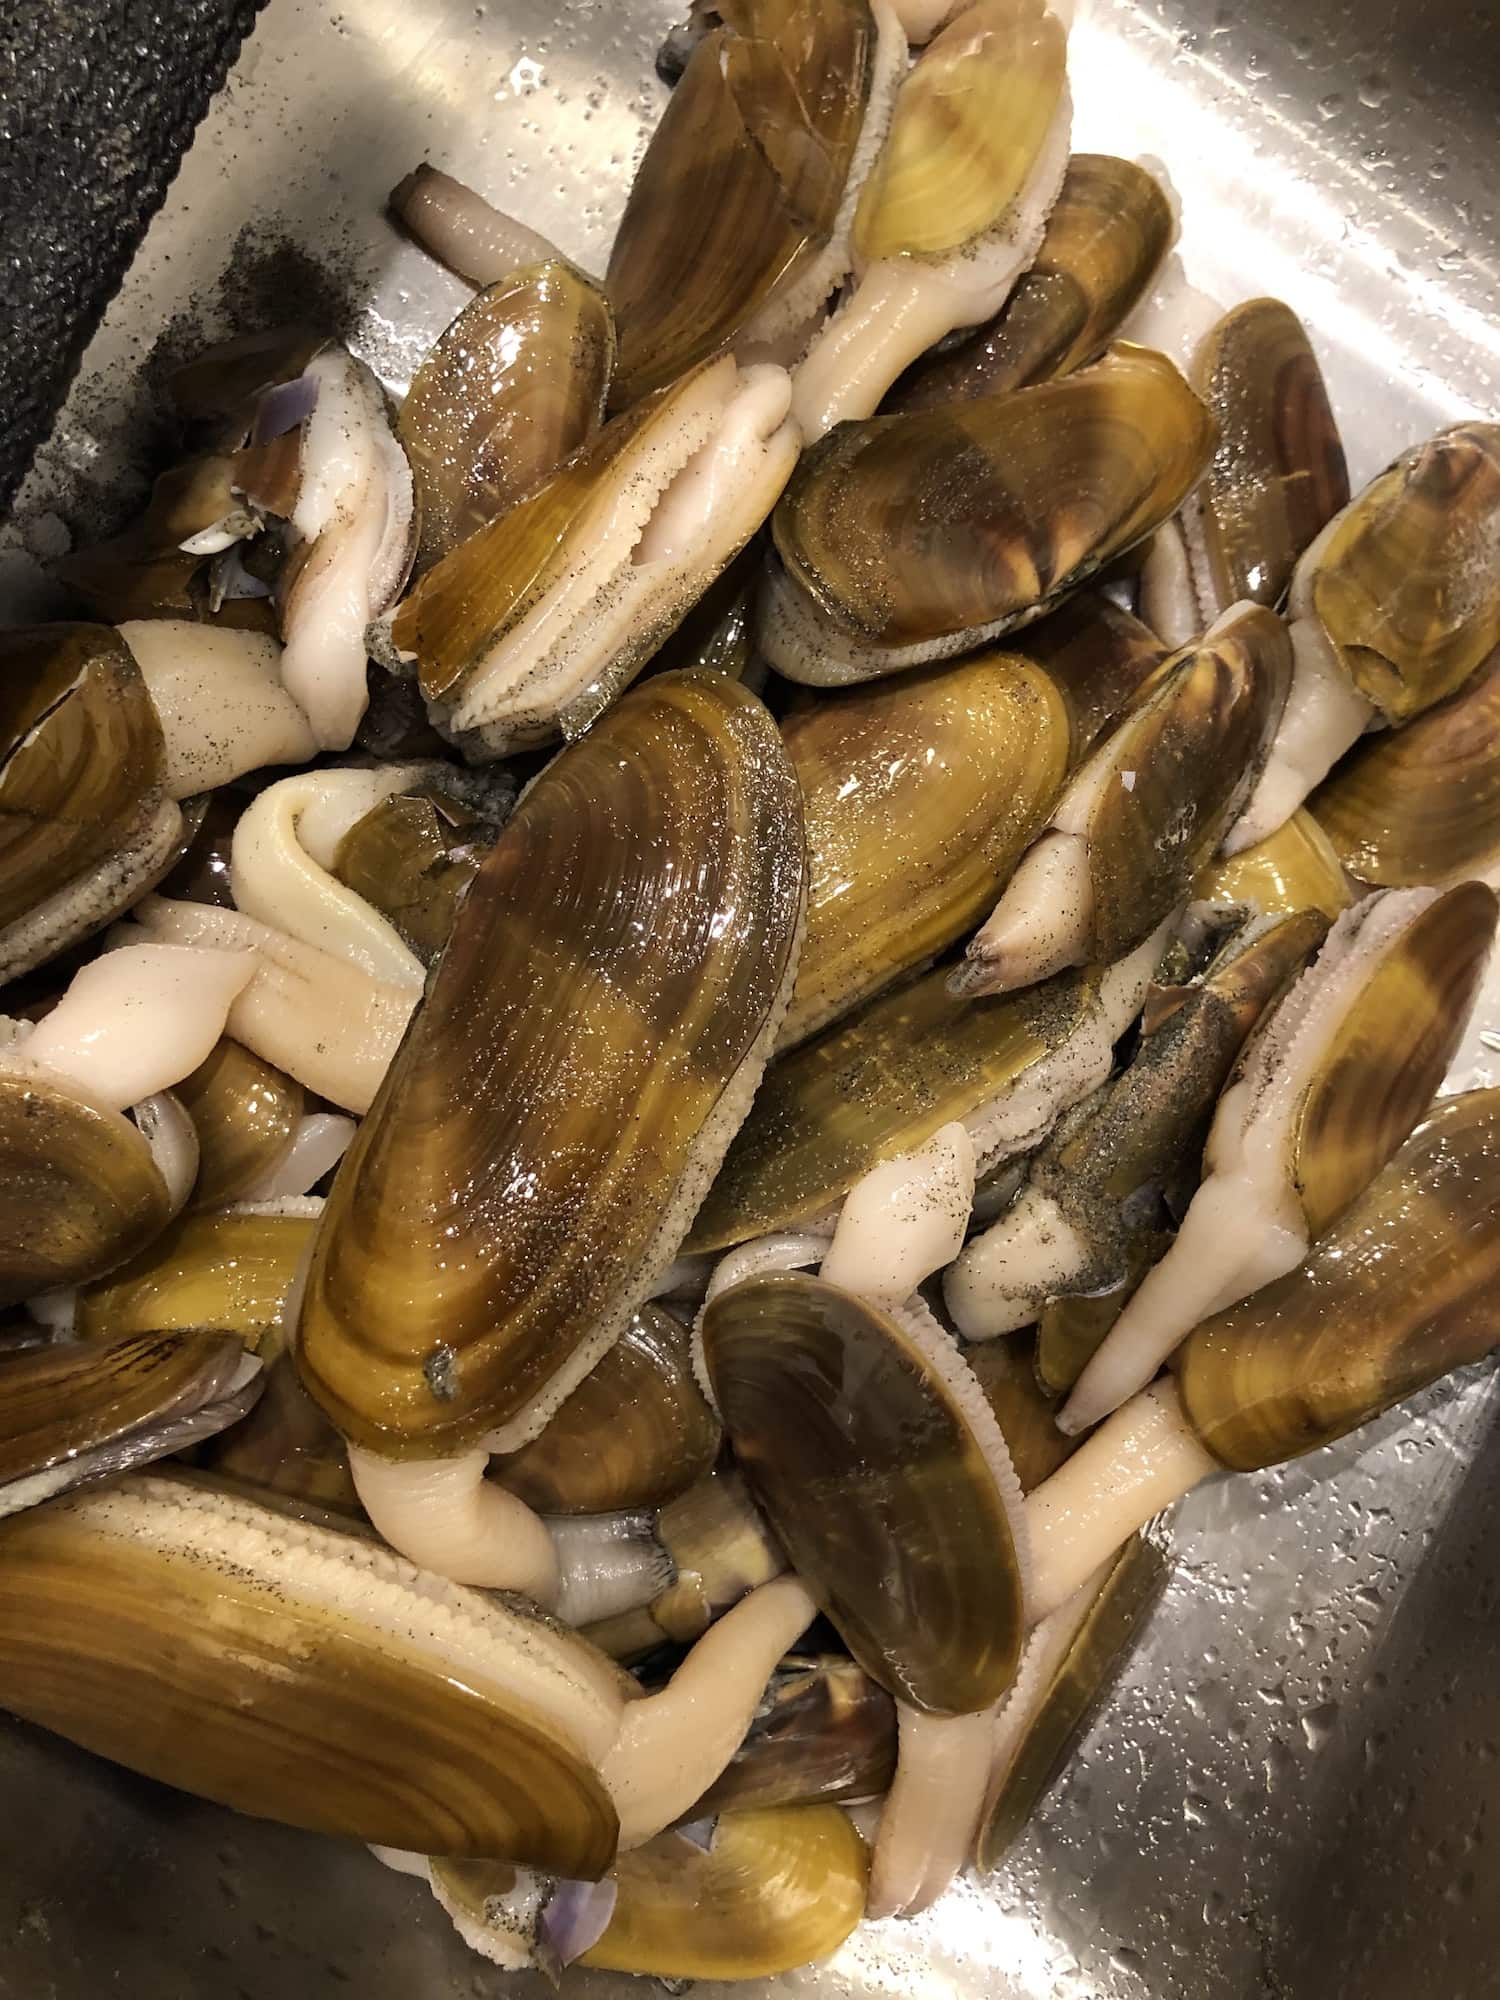 5 things to do while razor clam digging